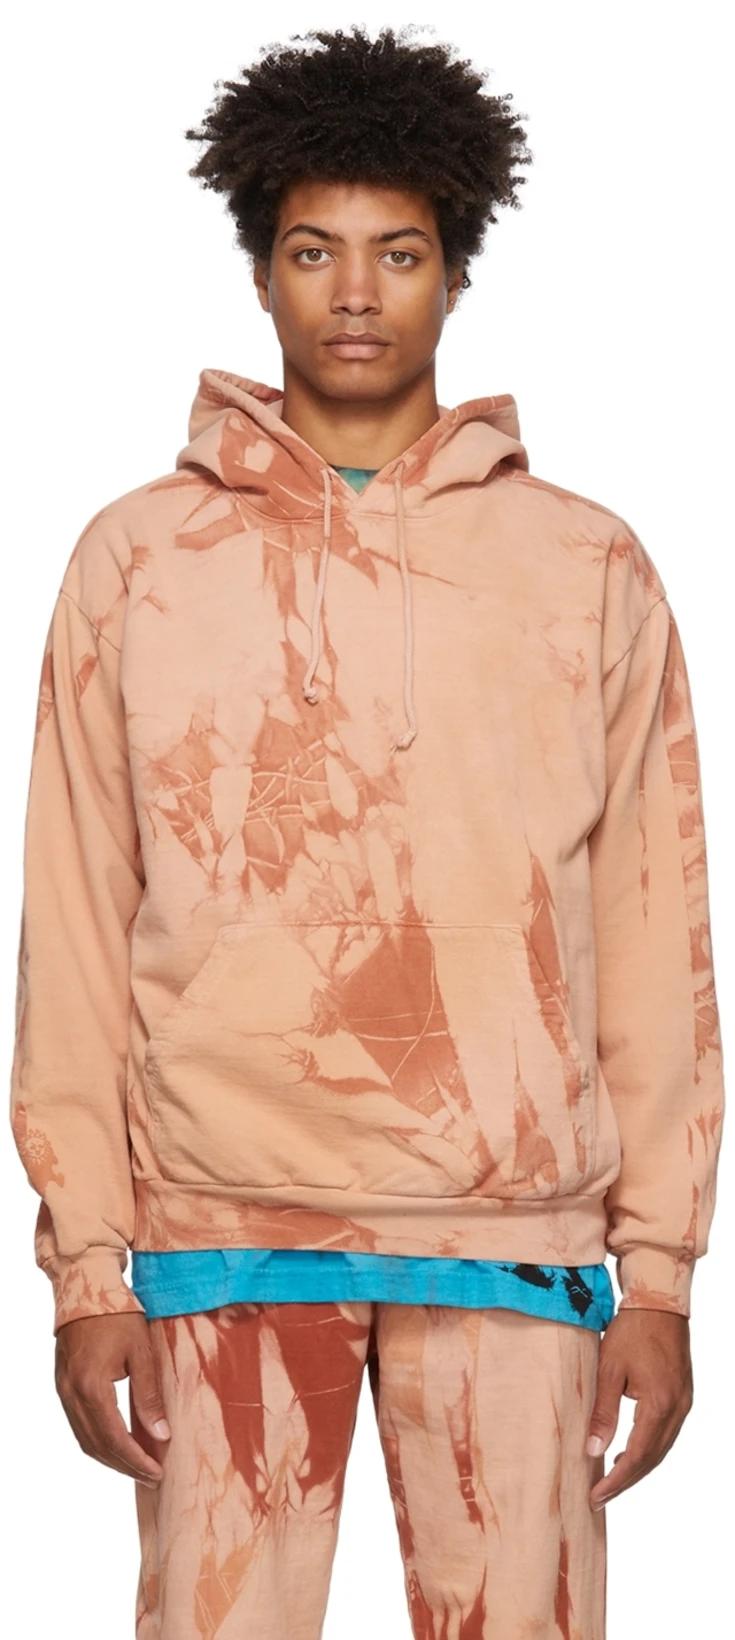 SSENSE Exclusive Tie-Dye Hoodie by COME BACK AS A FLOWER